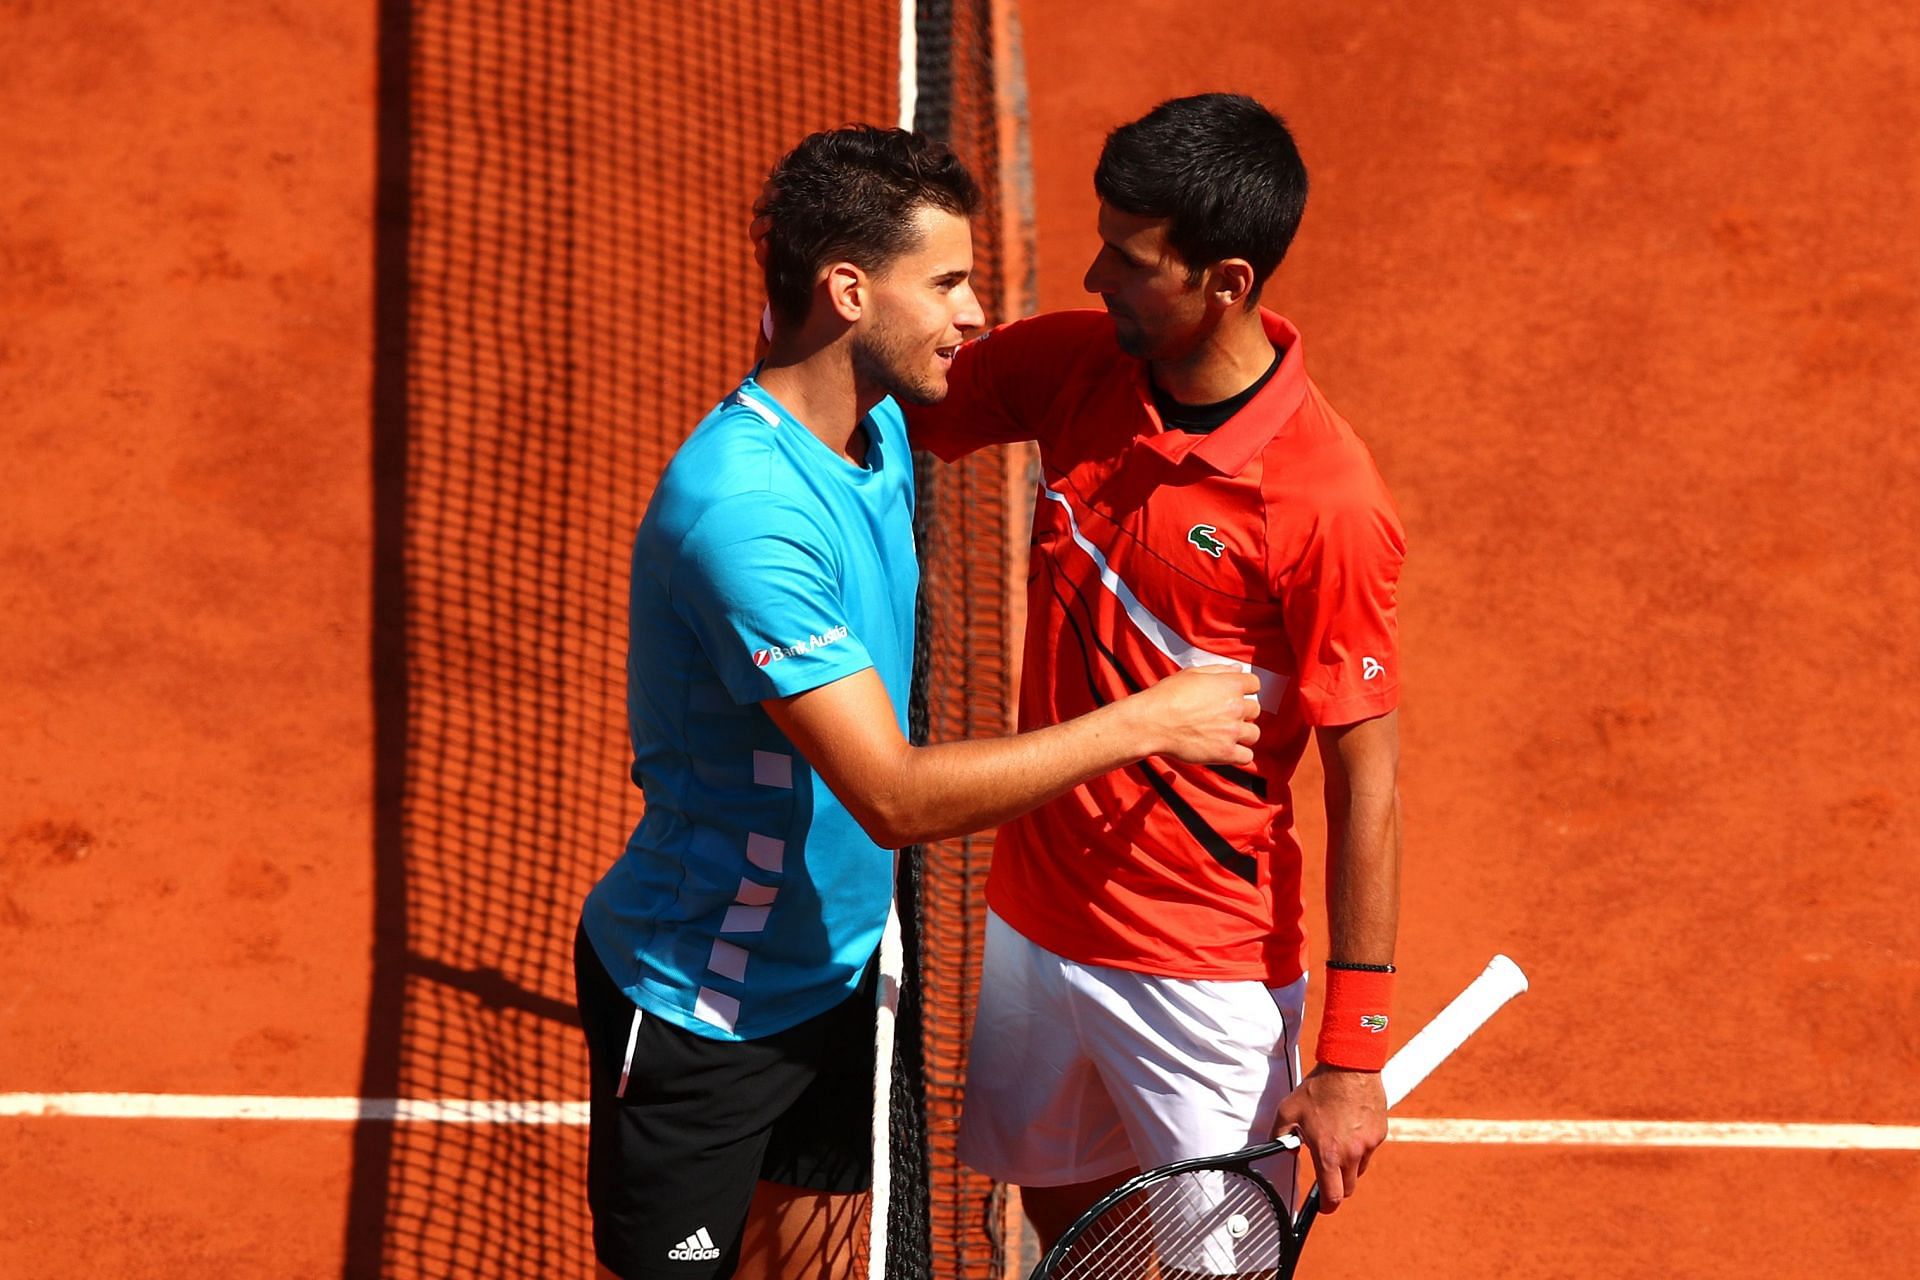 Dominic Thiem and Novak Djokovic embrace after 2018 French Open SF